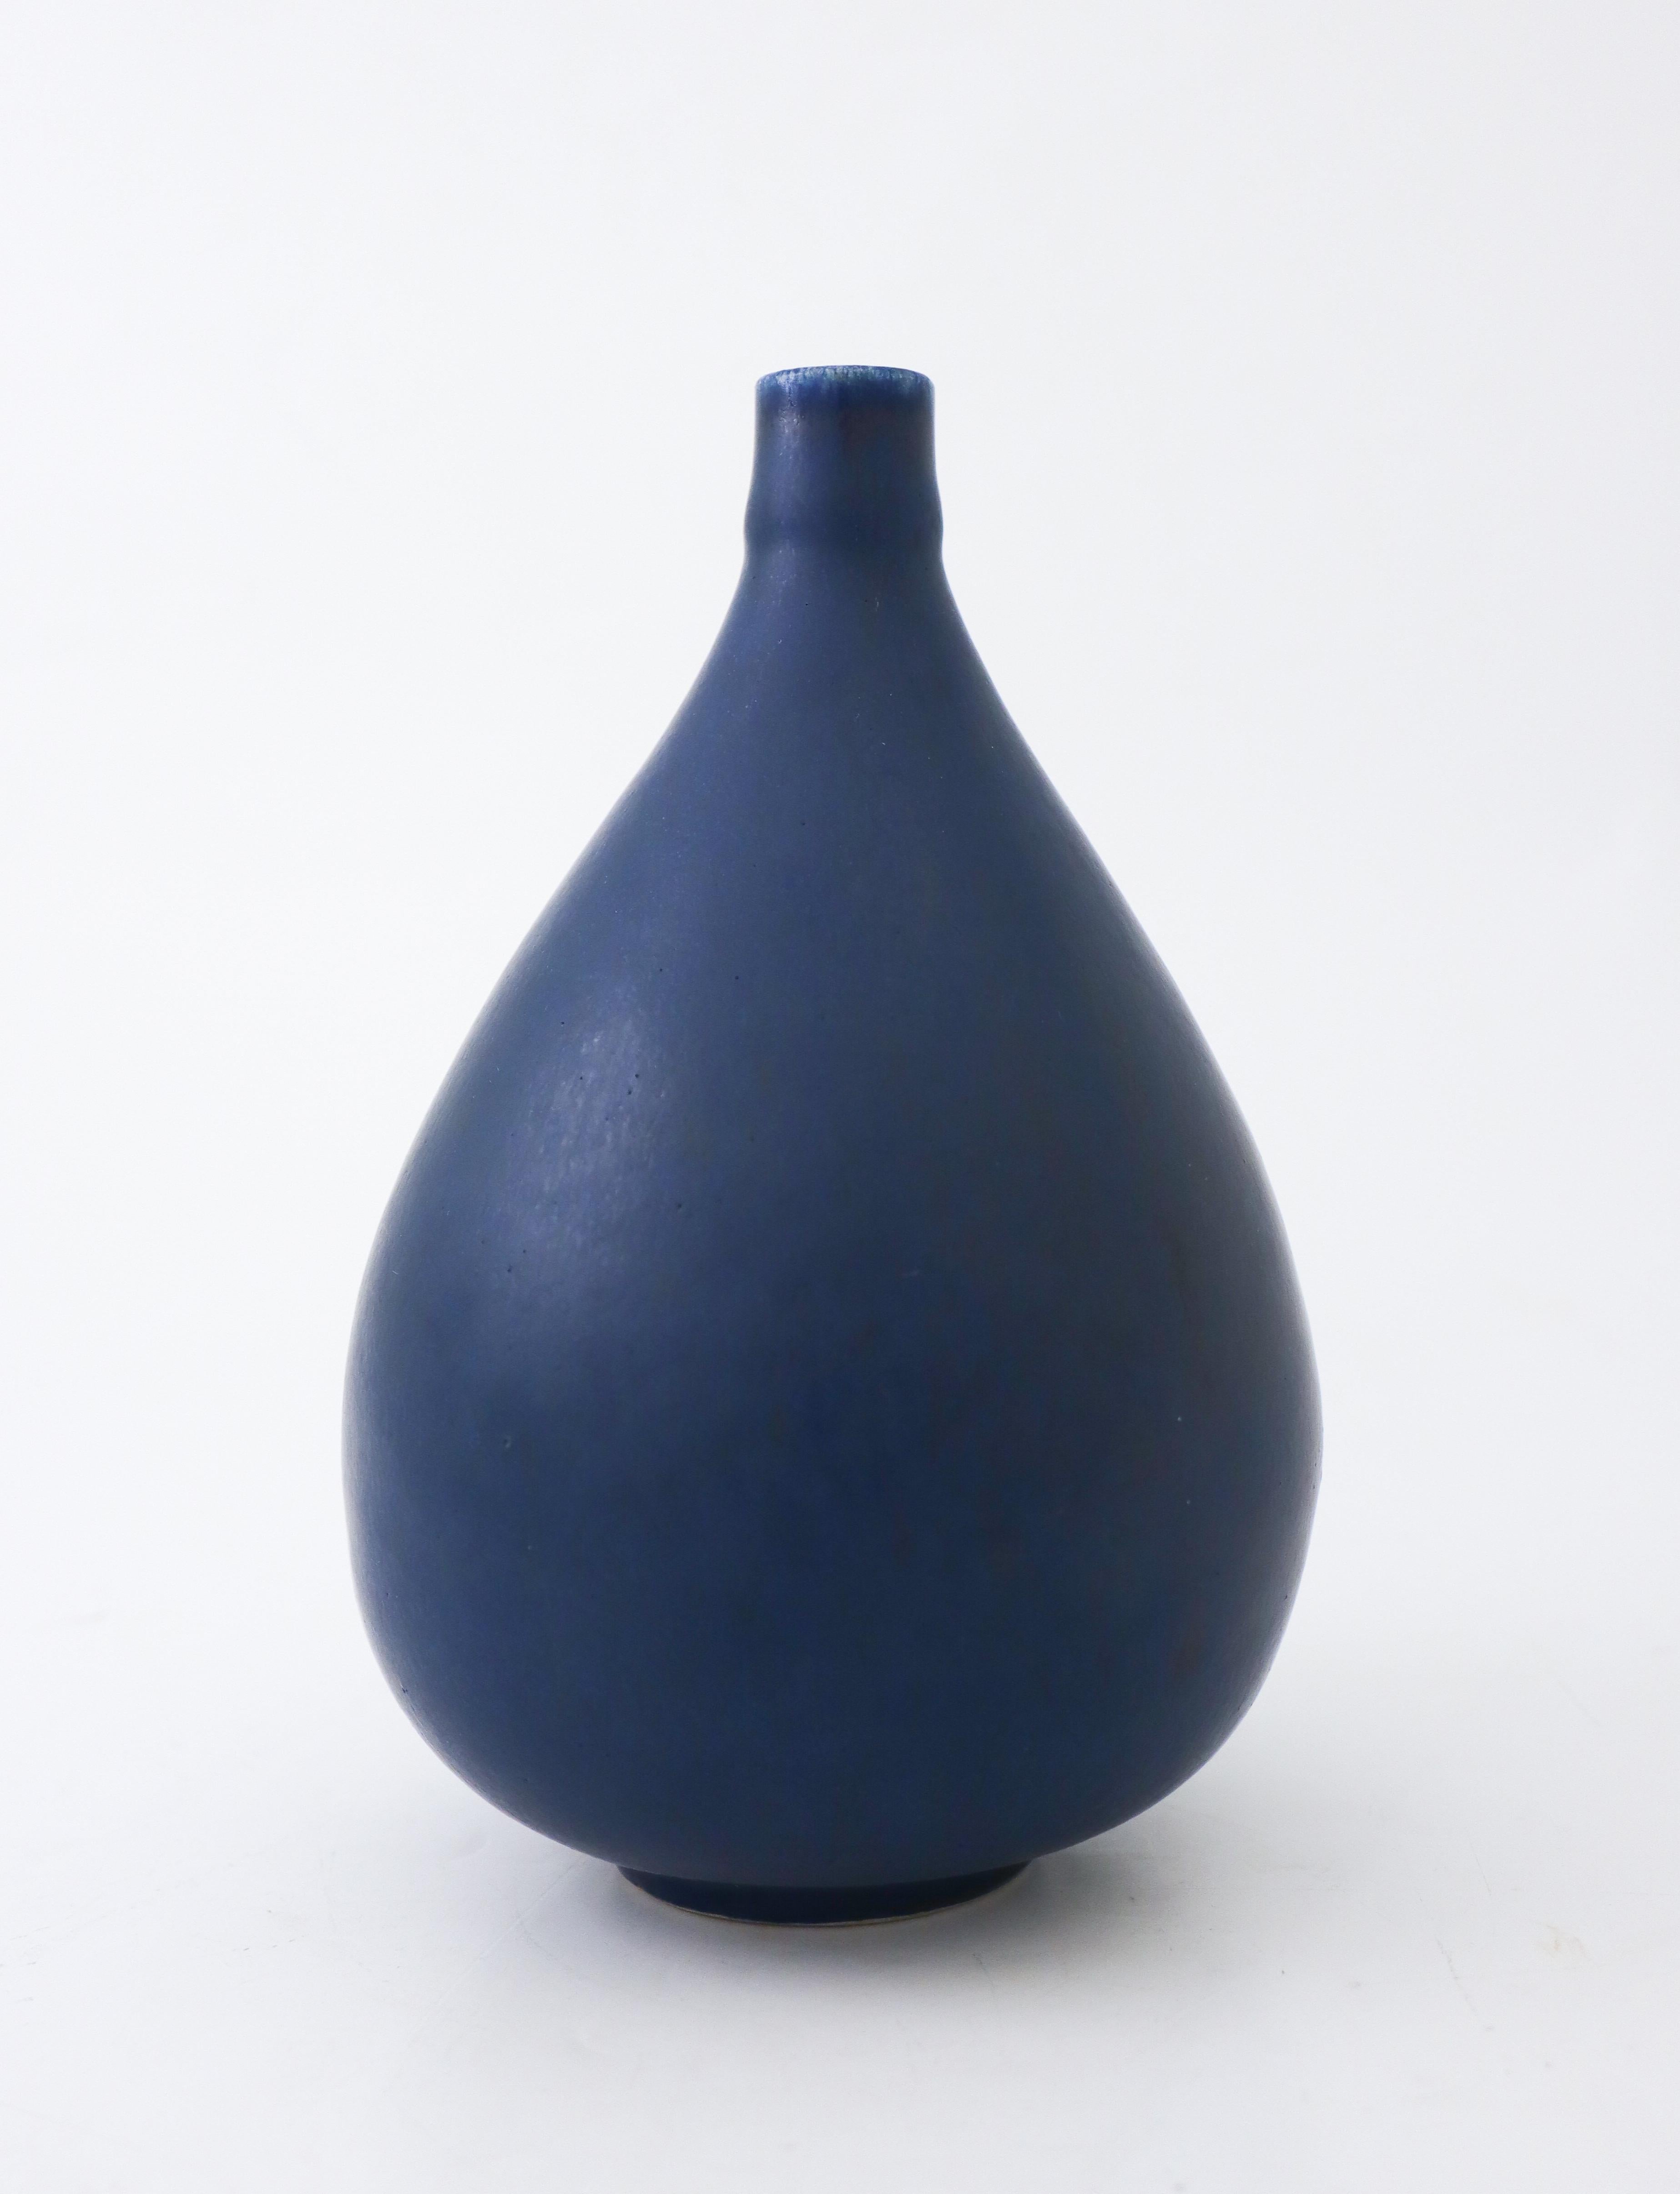 A lovely blue vase designed by Eva Stæhr Nielsen at Saxbo in Denmark. The vase is 20 cm high and in mint condition.
 